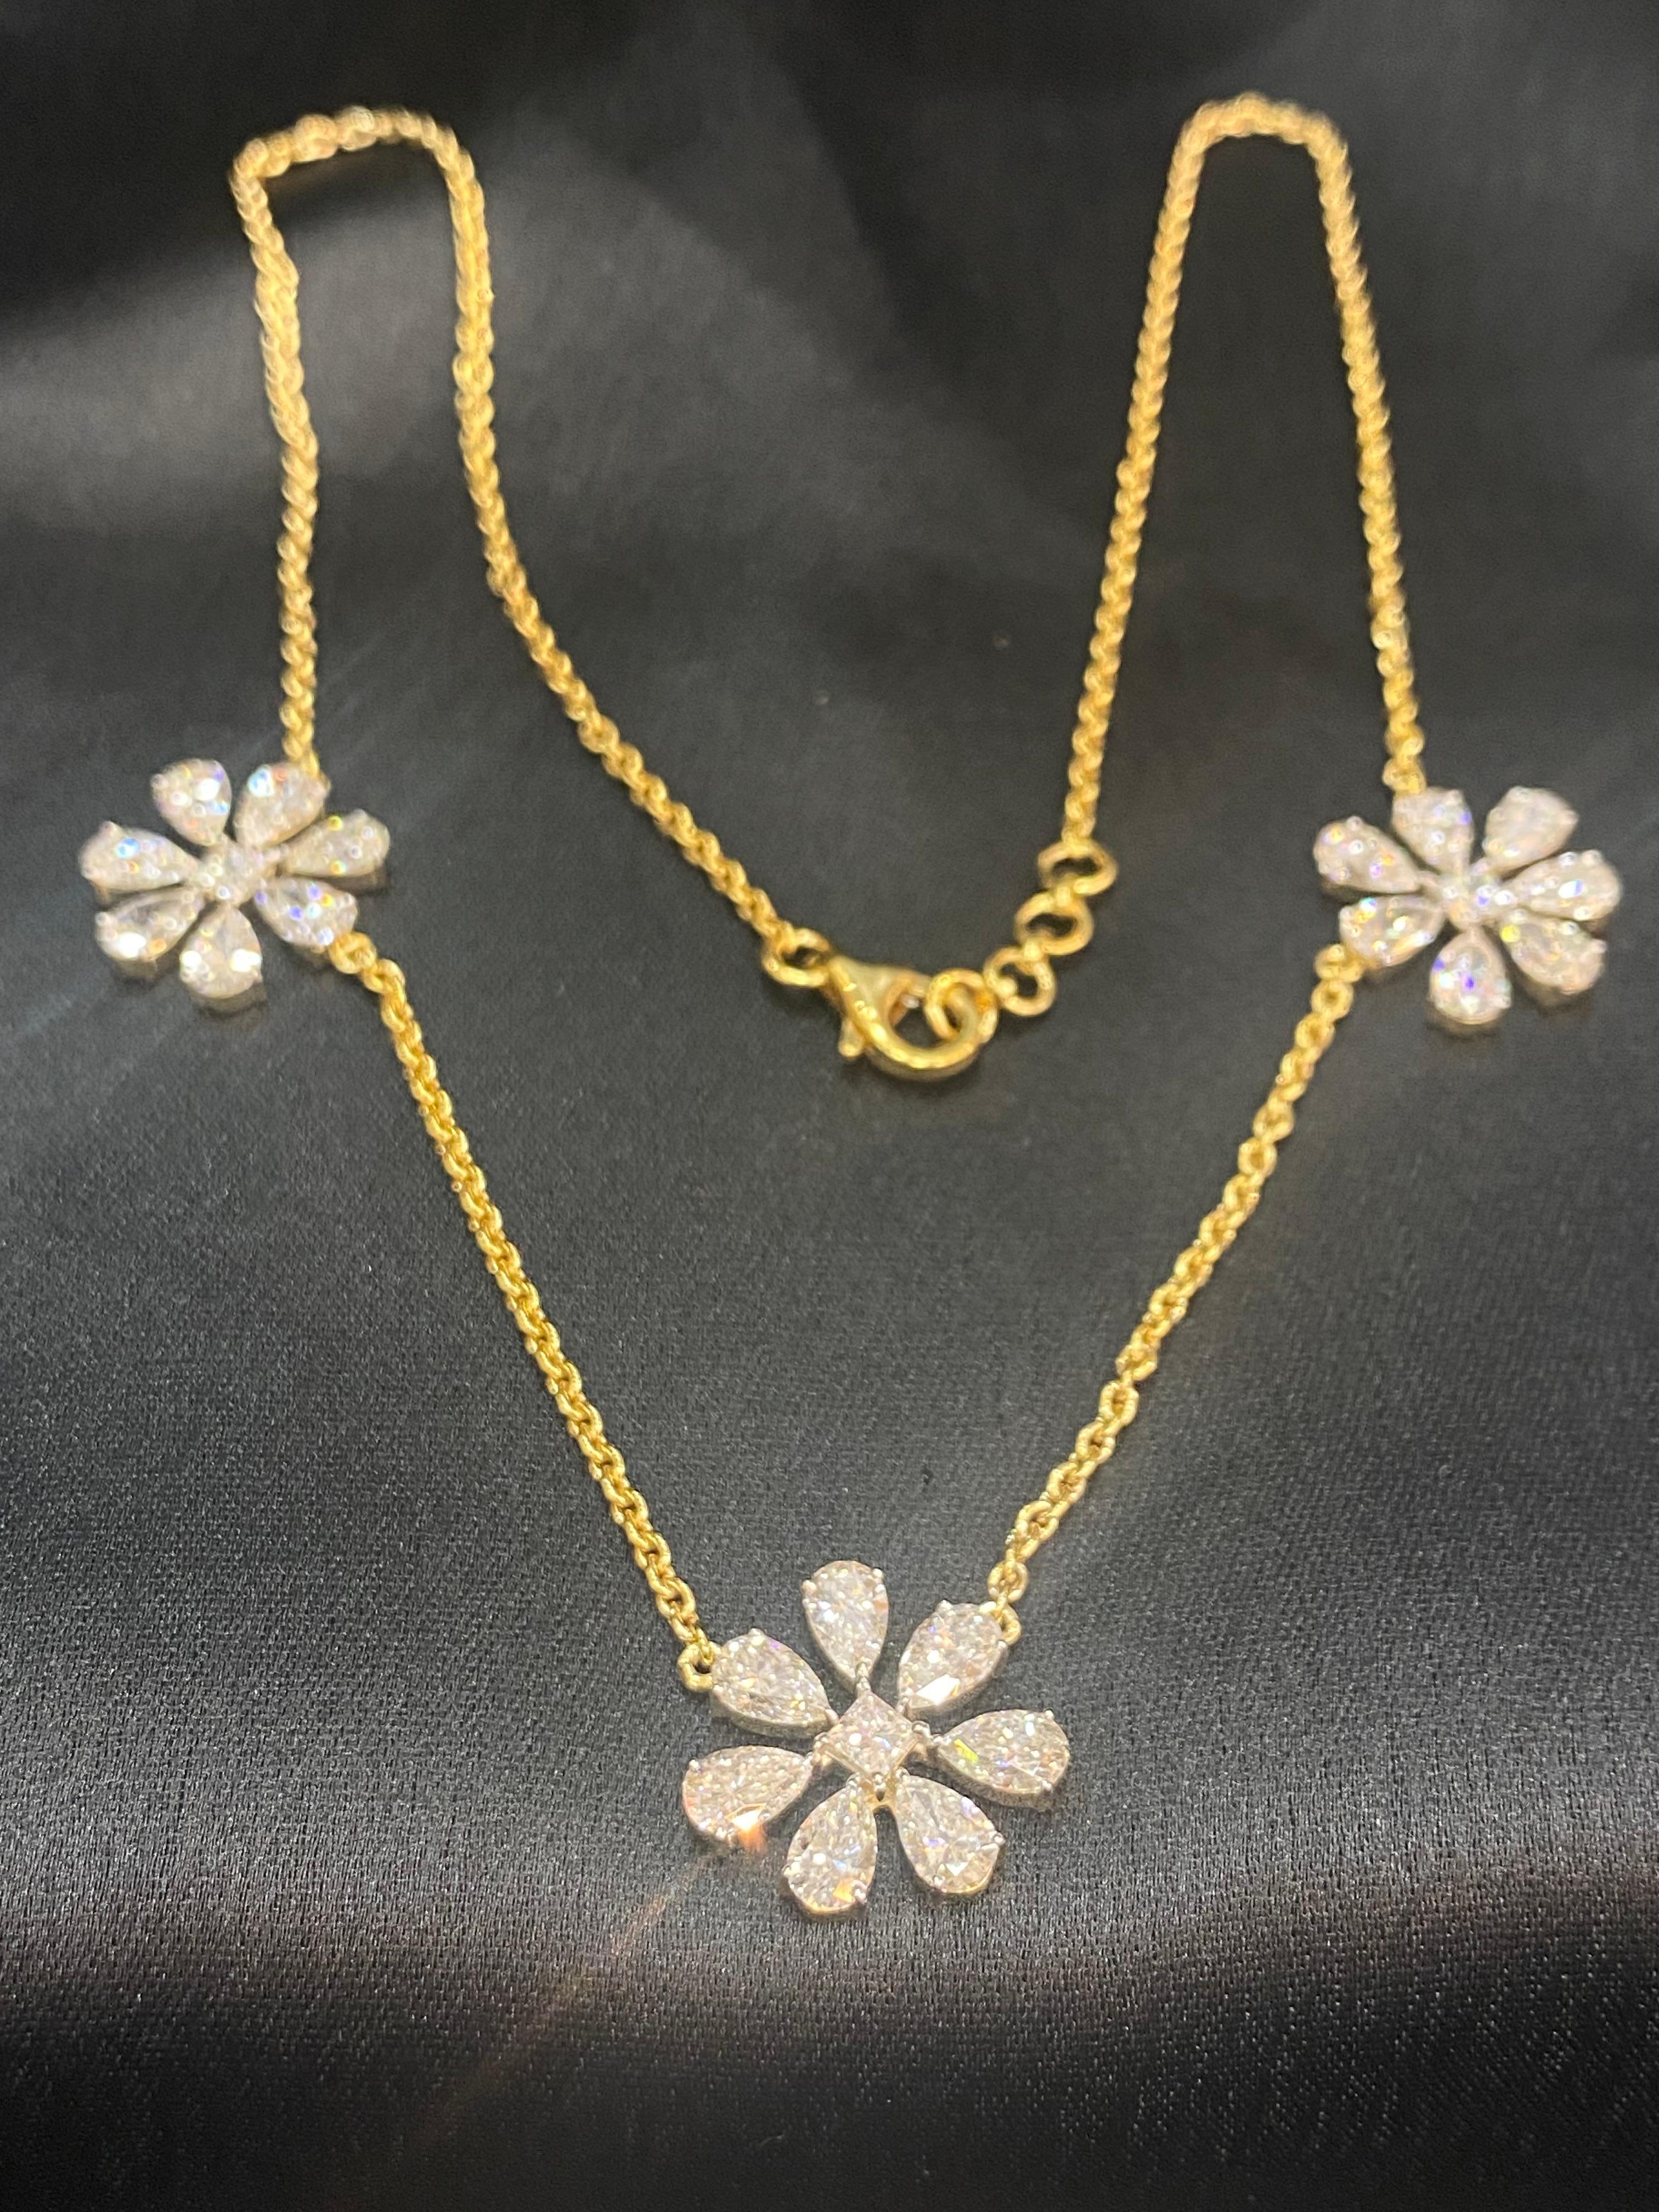 Experience the brilliance and glamour of this stunning 6.75 carat Pear Princess diamond 3-flower necklace in 14k yellow gold, perfectly poised to elevate your dazzle and charm!

Specifications : 

Diamond Weight : 6.75 Cts [6.30 Cts Pear + 0.45 Cts